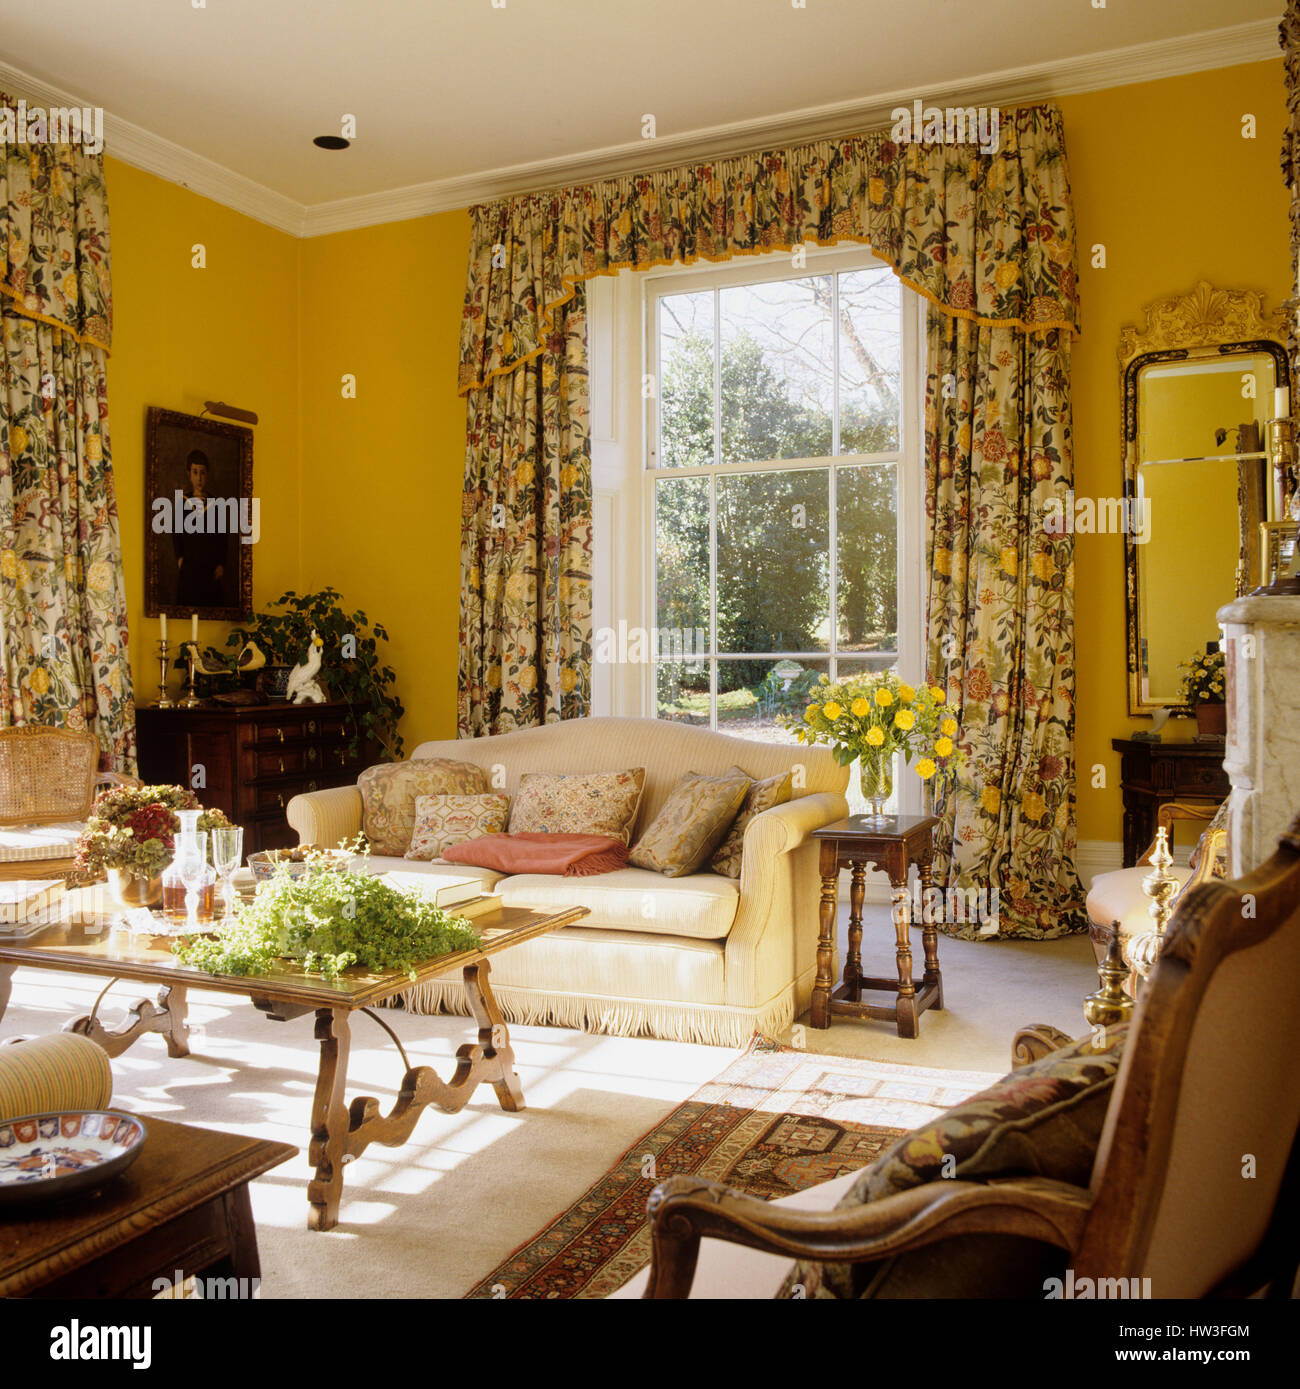 Living room with floral patterned curtains. Stock Photo